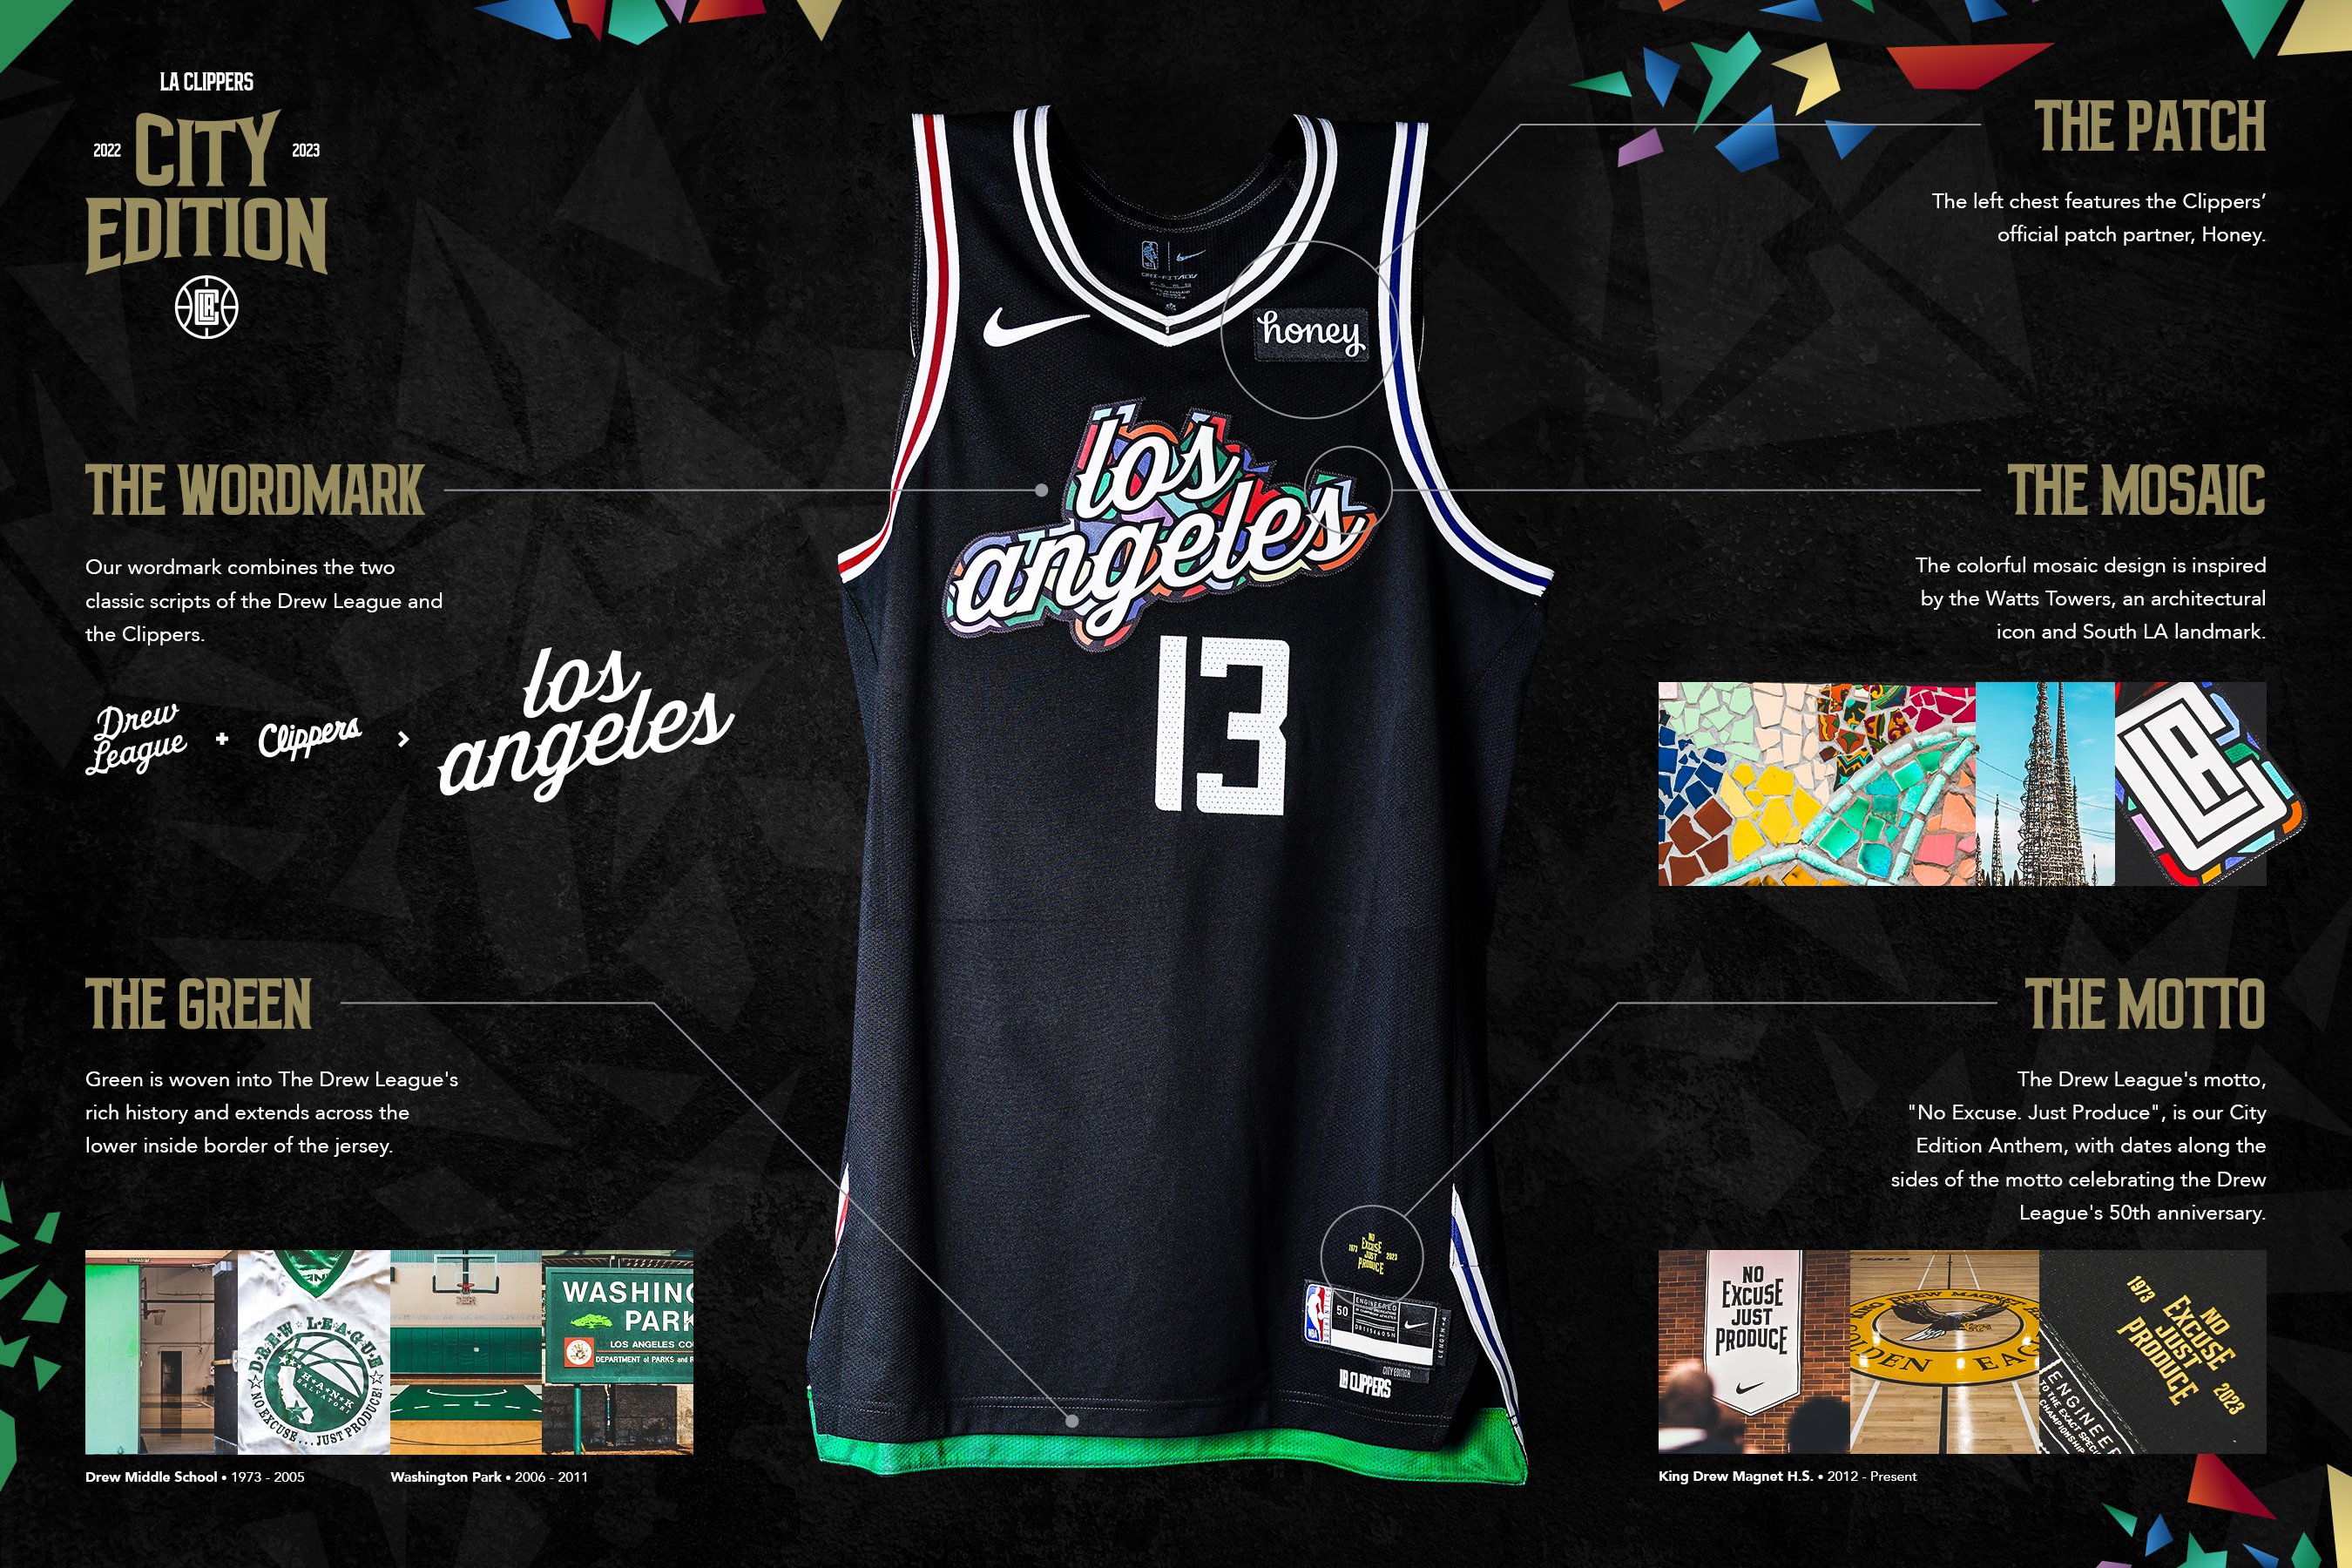 Tomer Azarly på Twitter: The LA Clippers have unveiled their 2022-23 Nike  NBA City Edition uniforms, which celebrate and honor the Drew League and  its role in L.A.'s basketball community and culture.